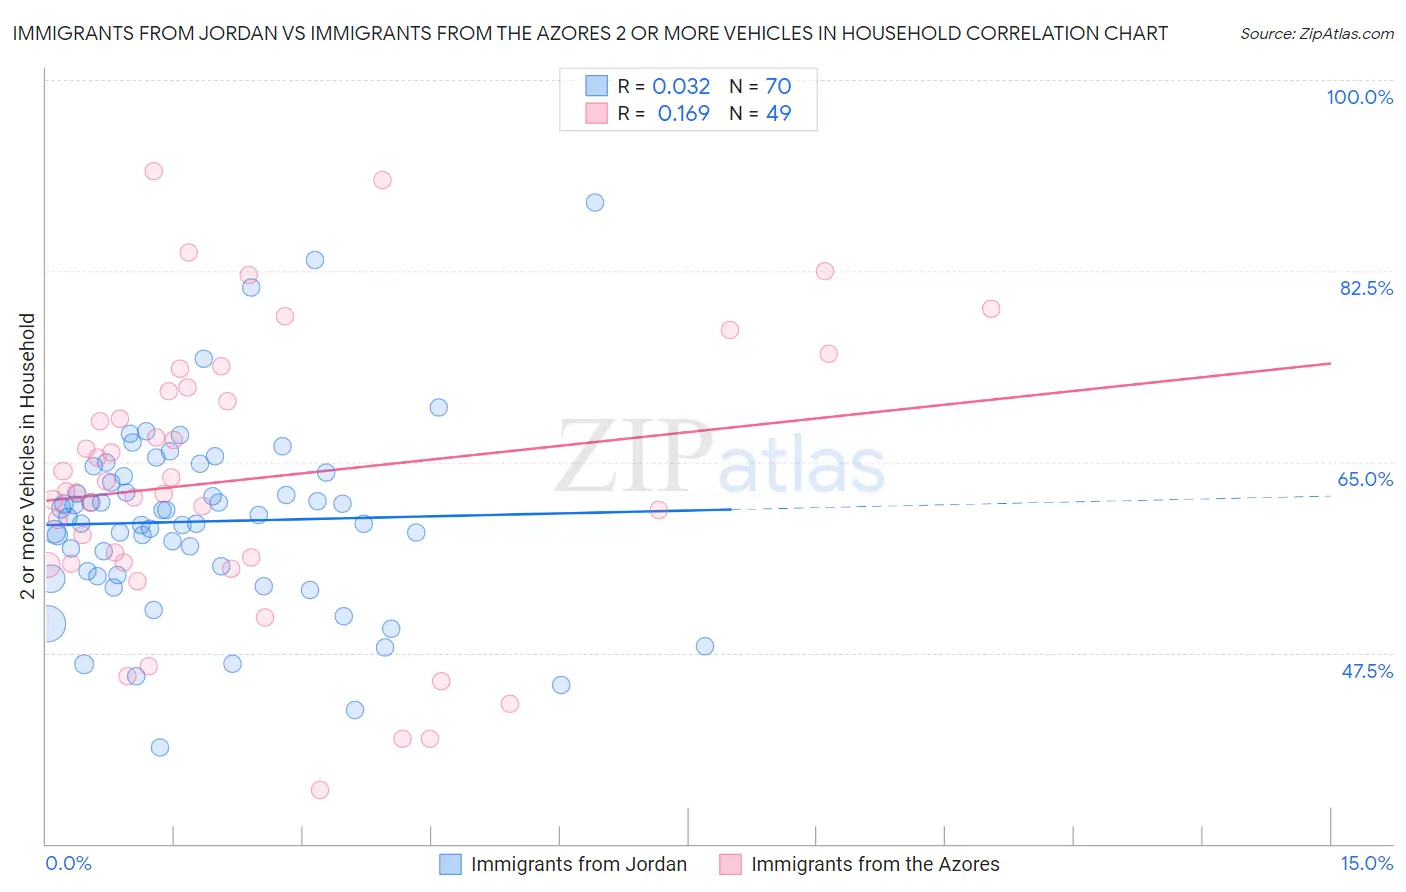 Immigrants from Jordan vs Immigrants from the Azores 2 or more Vehicles in Household